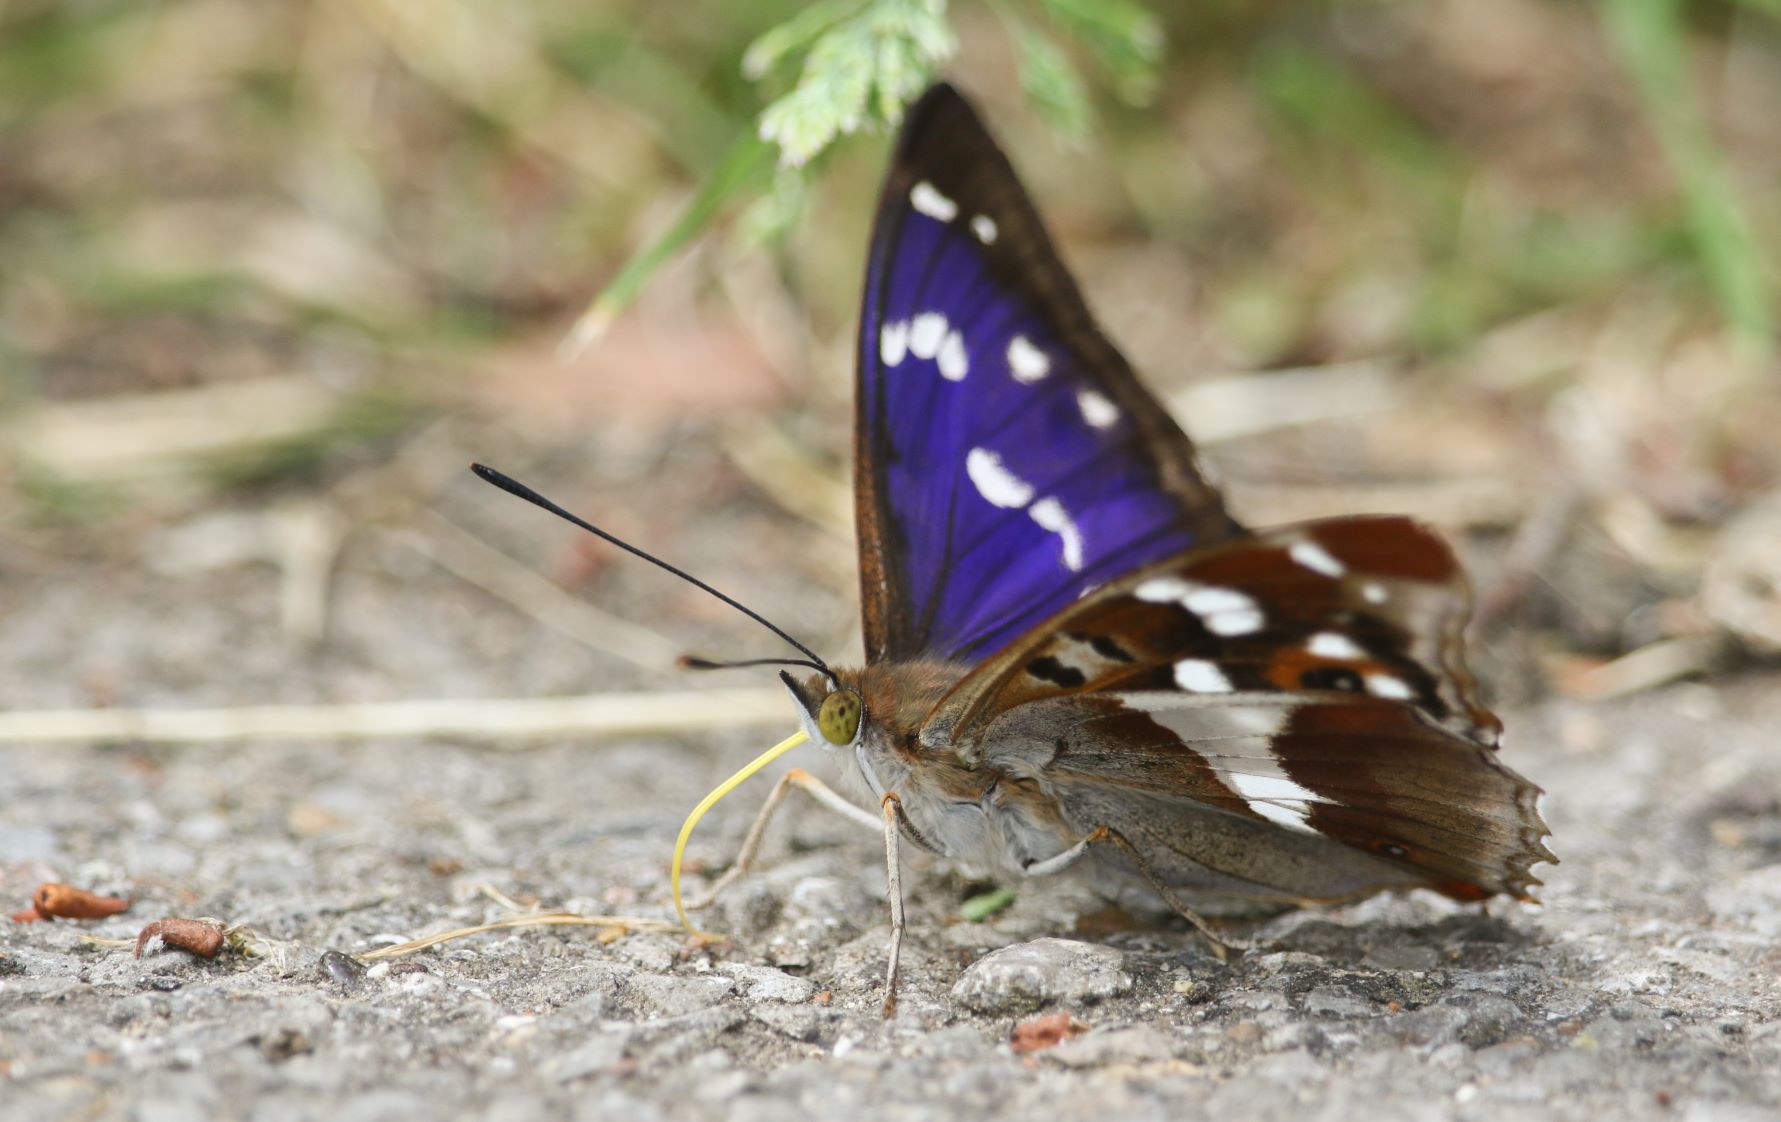 Close up of a purple emperor butterfly feeding on the ground